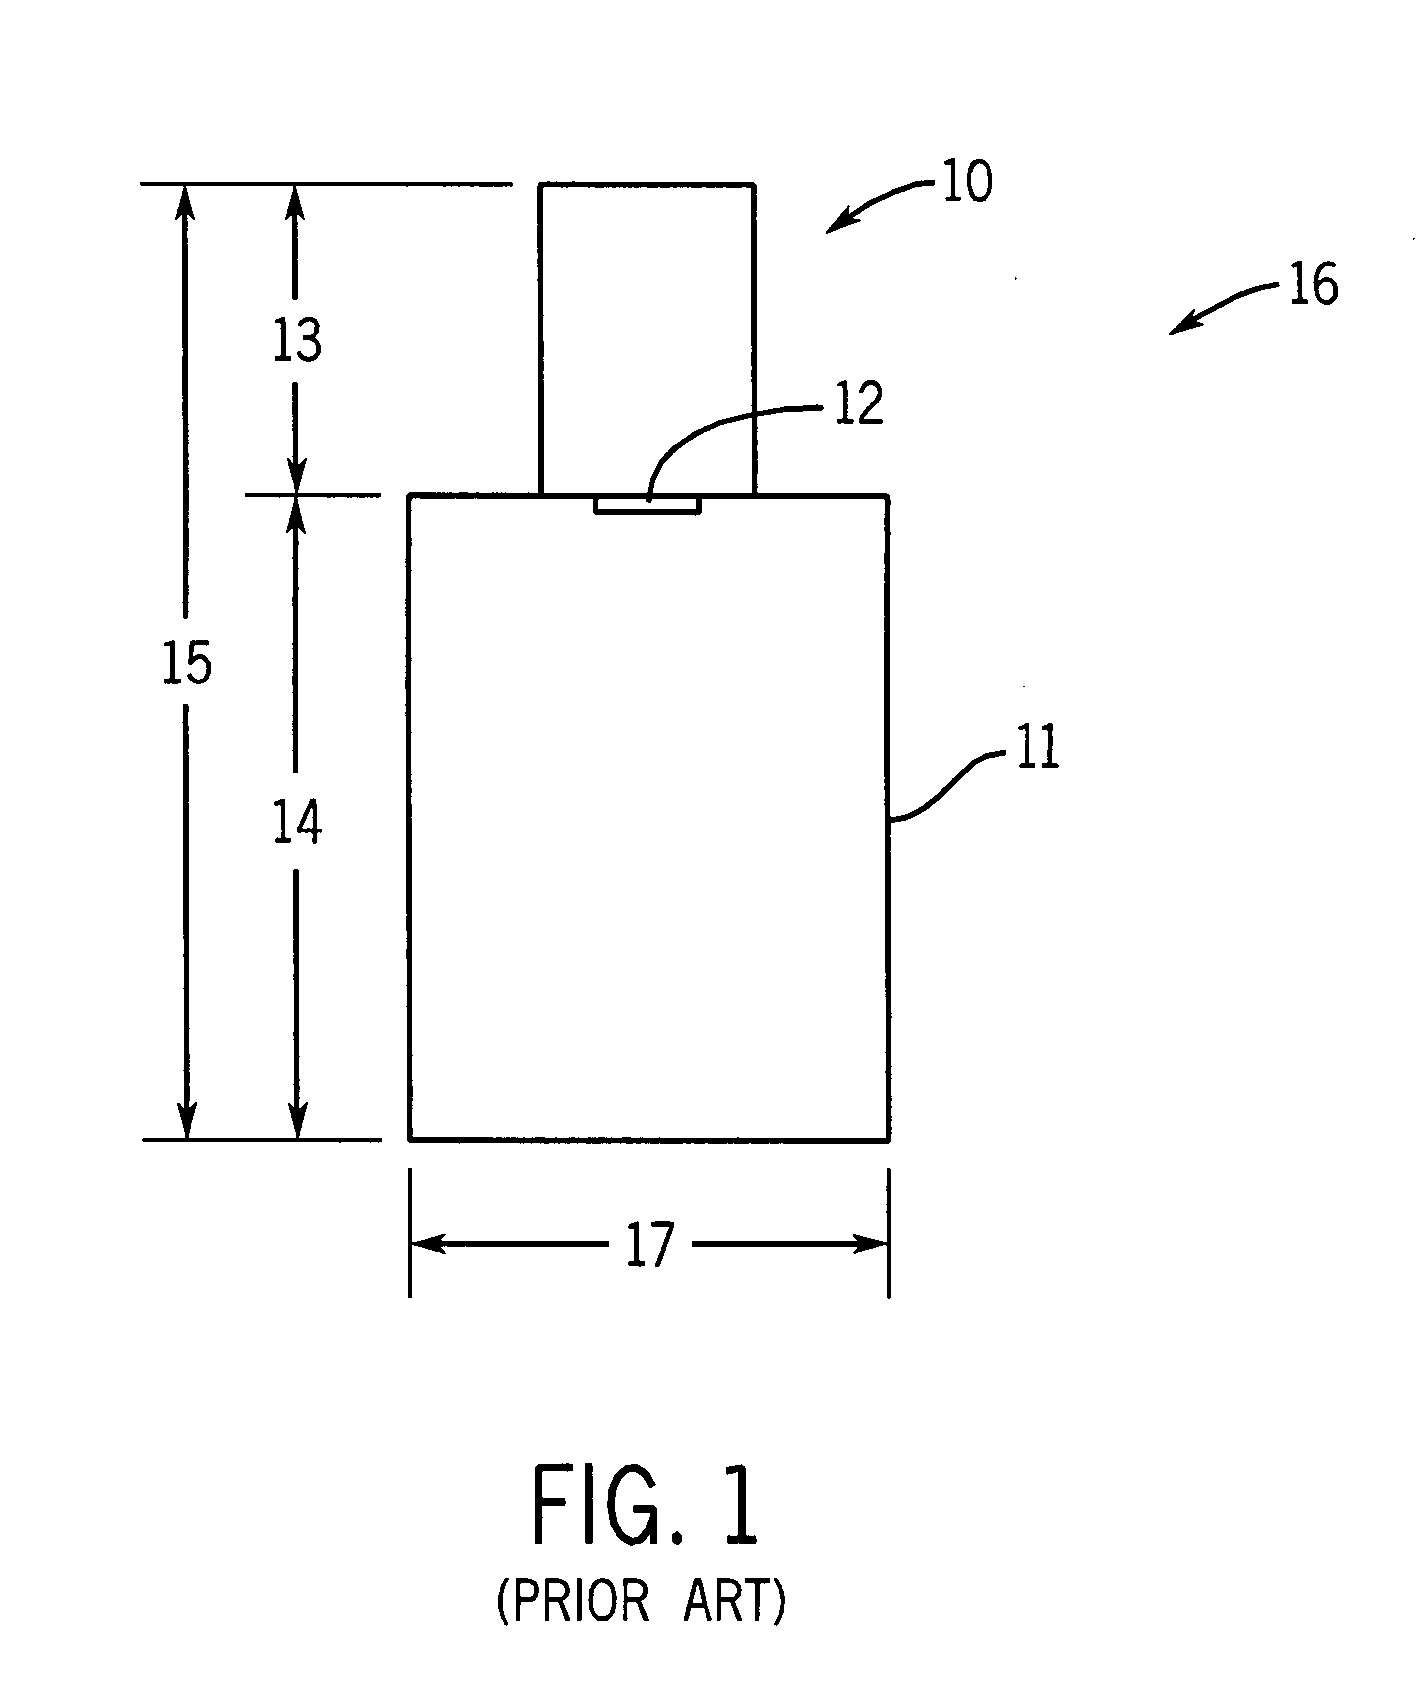 Mechanical delay mechanisms for inertial igniters for thermal batteries and the like